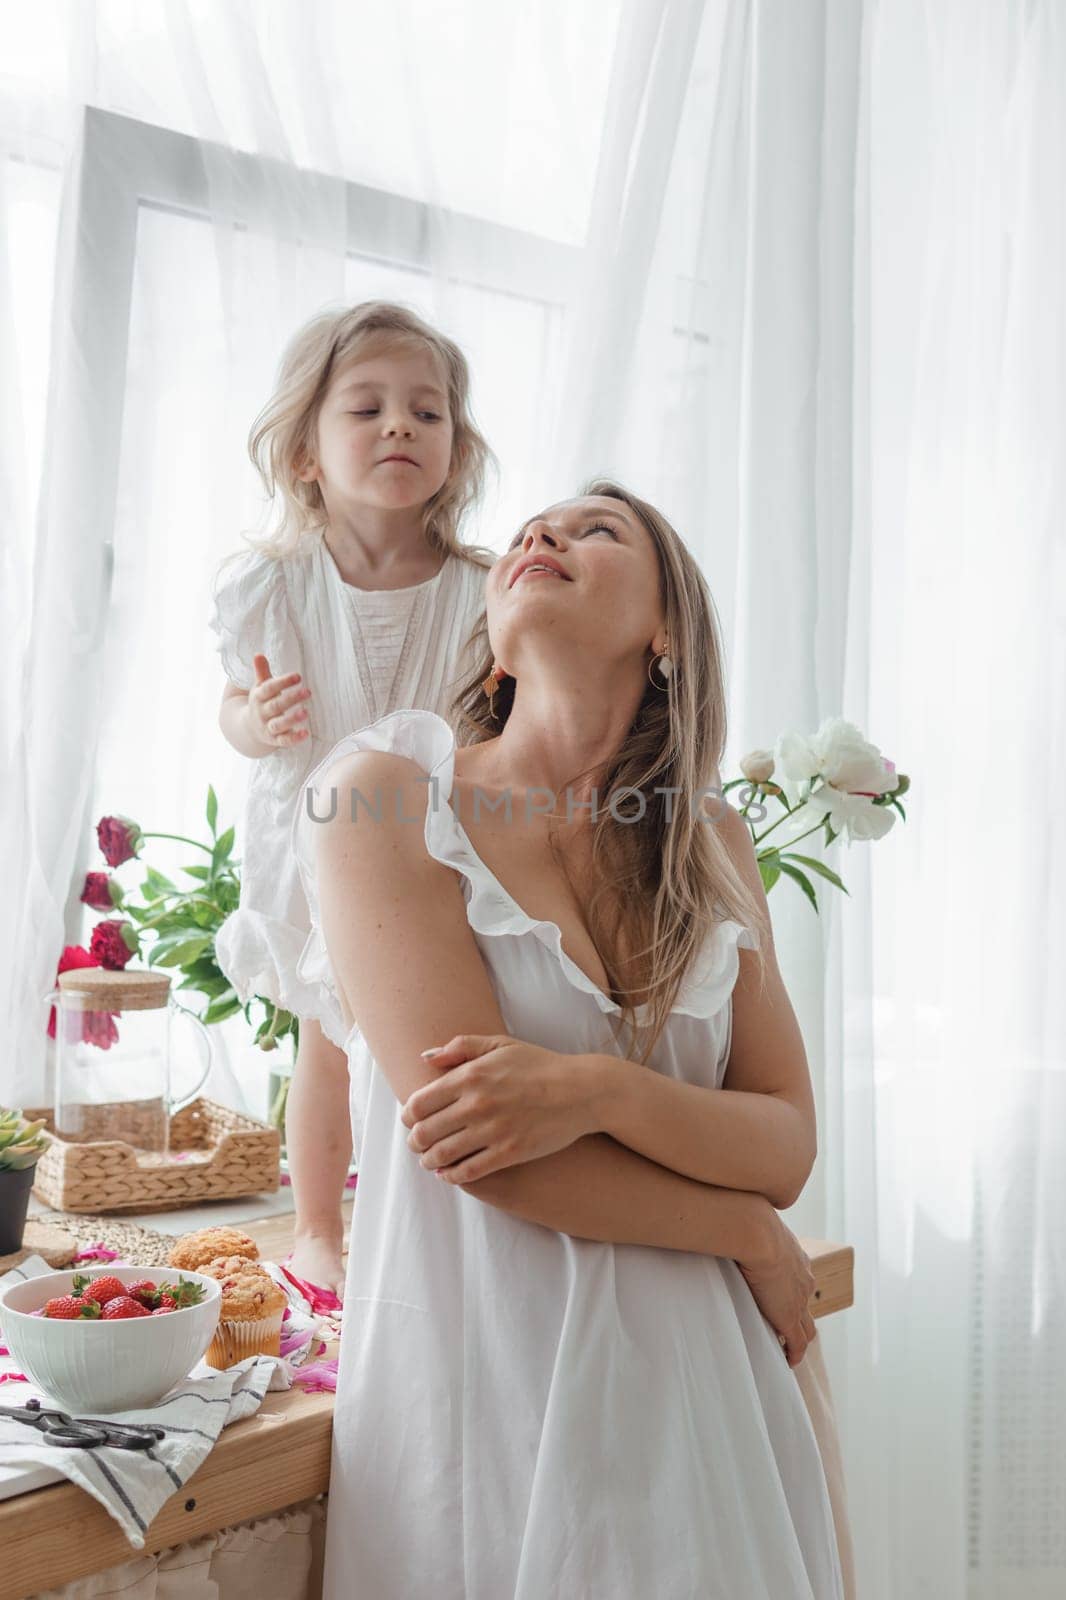 A little blonde girl with her mom on a kitchen countertop decorated with peonies. The concept of the relationship between mother and daughter. Spring atmosphere. by Annu1tochka